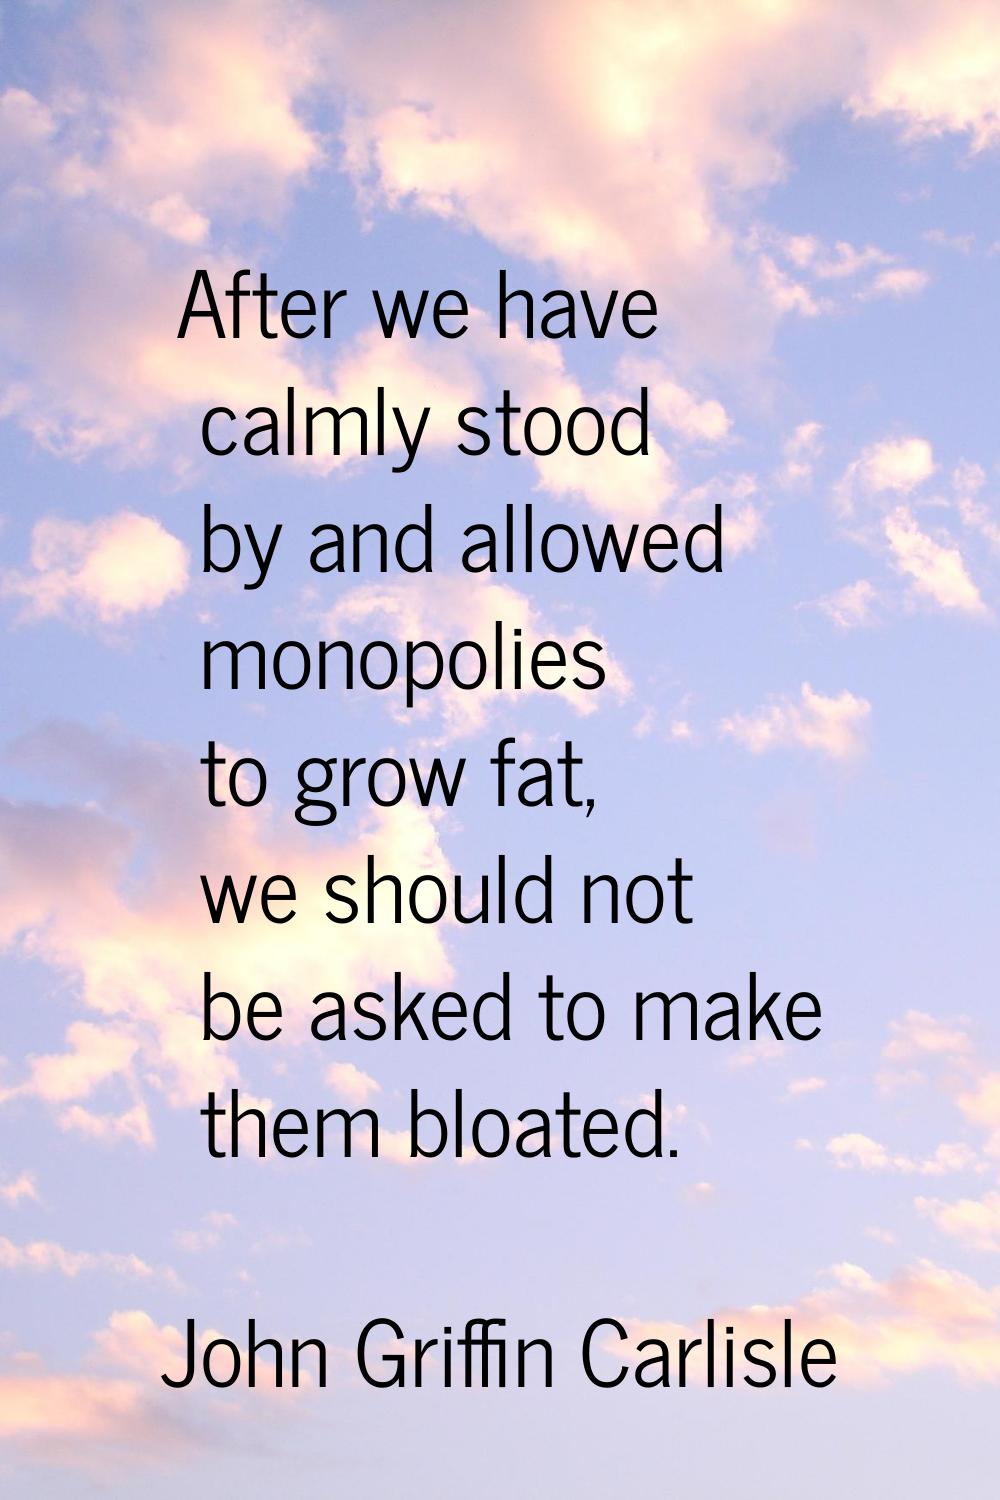 After we have calmly stood by and allowed monopolies to grow fat, we should not be asked to make th